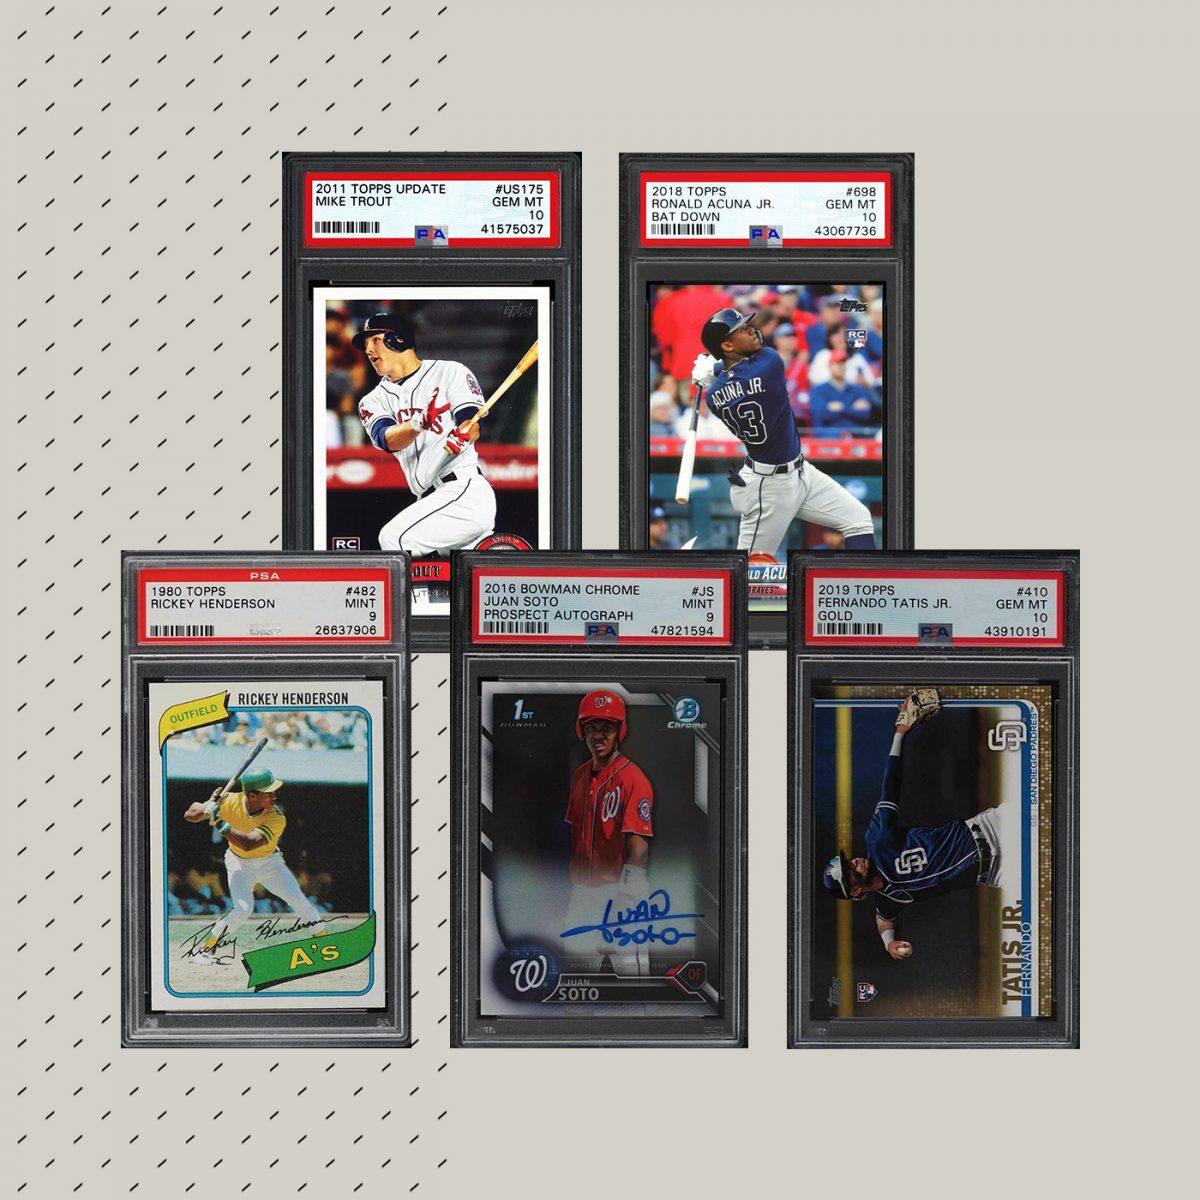 The Most Expensive Baseball Cards On StockX